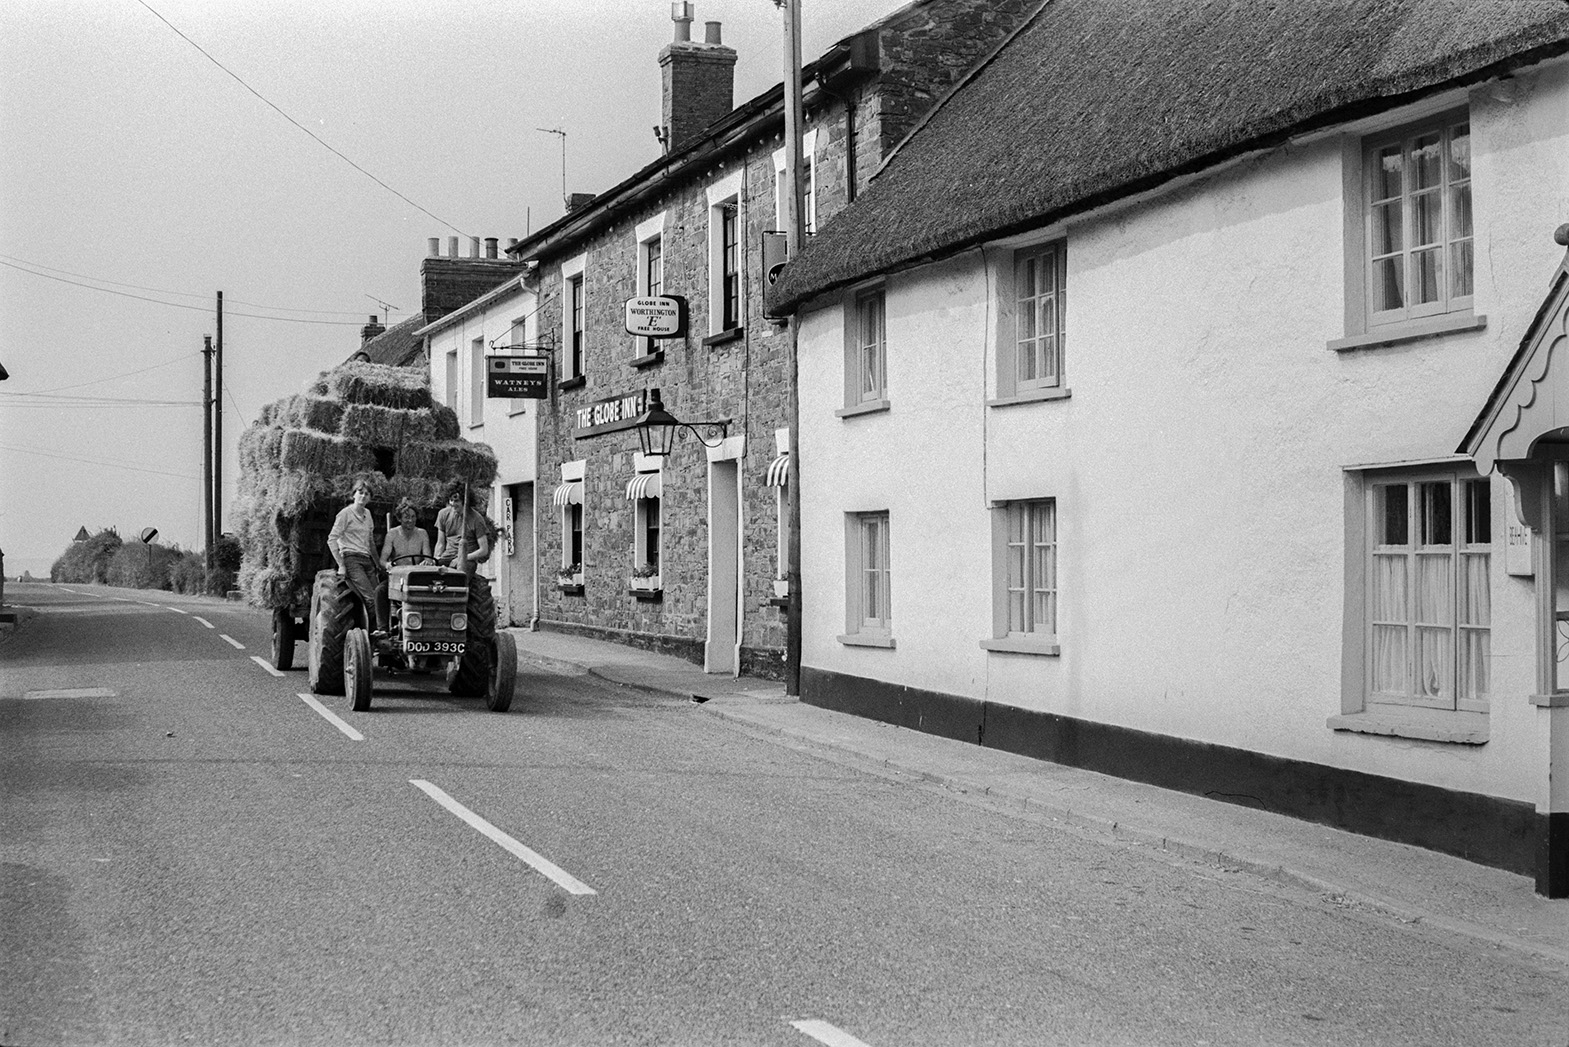 Two men and a woman transporting hay bales with a tractor and trailer down a street in Beaford, past The Globe Inn. They are all sat on the tractor. Ivor Bourne is driving the tractor.